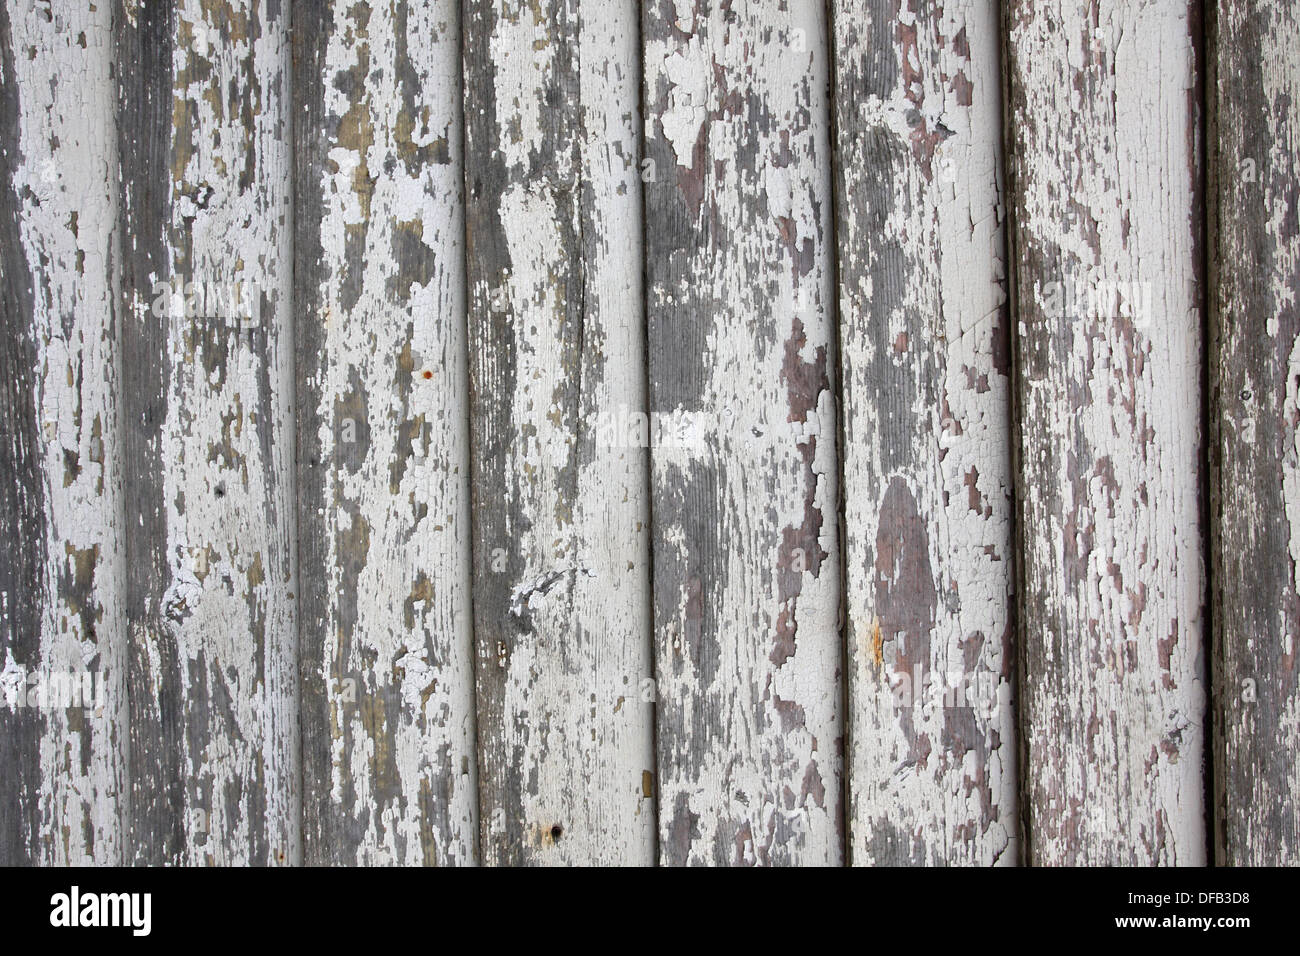 White flaking paint on timber weather boarding Stock Photo